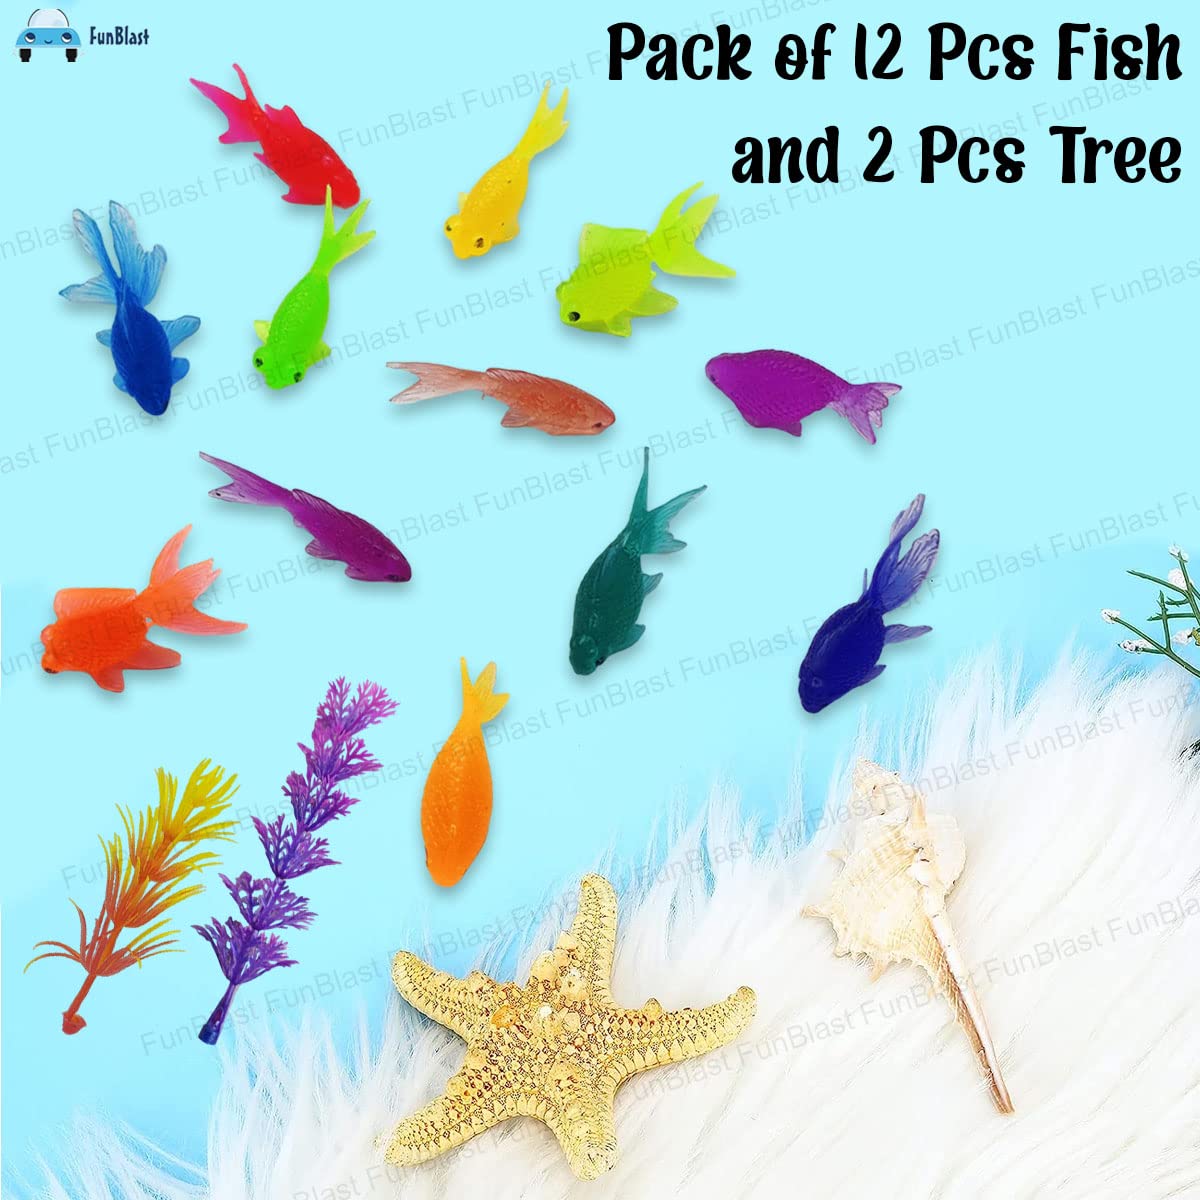 Little Cute Fish Toys – Pack of 12 Pcs Aquatic Sea Animal Toy for Kids, Sea Marine Animal Figure Playing Set for Kids, Sea Creatures Action Toys for 3+ Years Old Kids, Boys, Girls